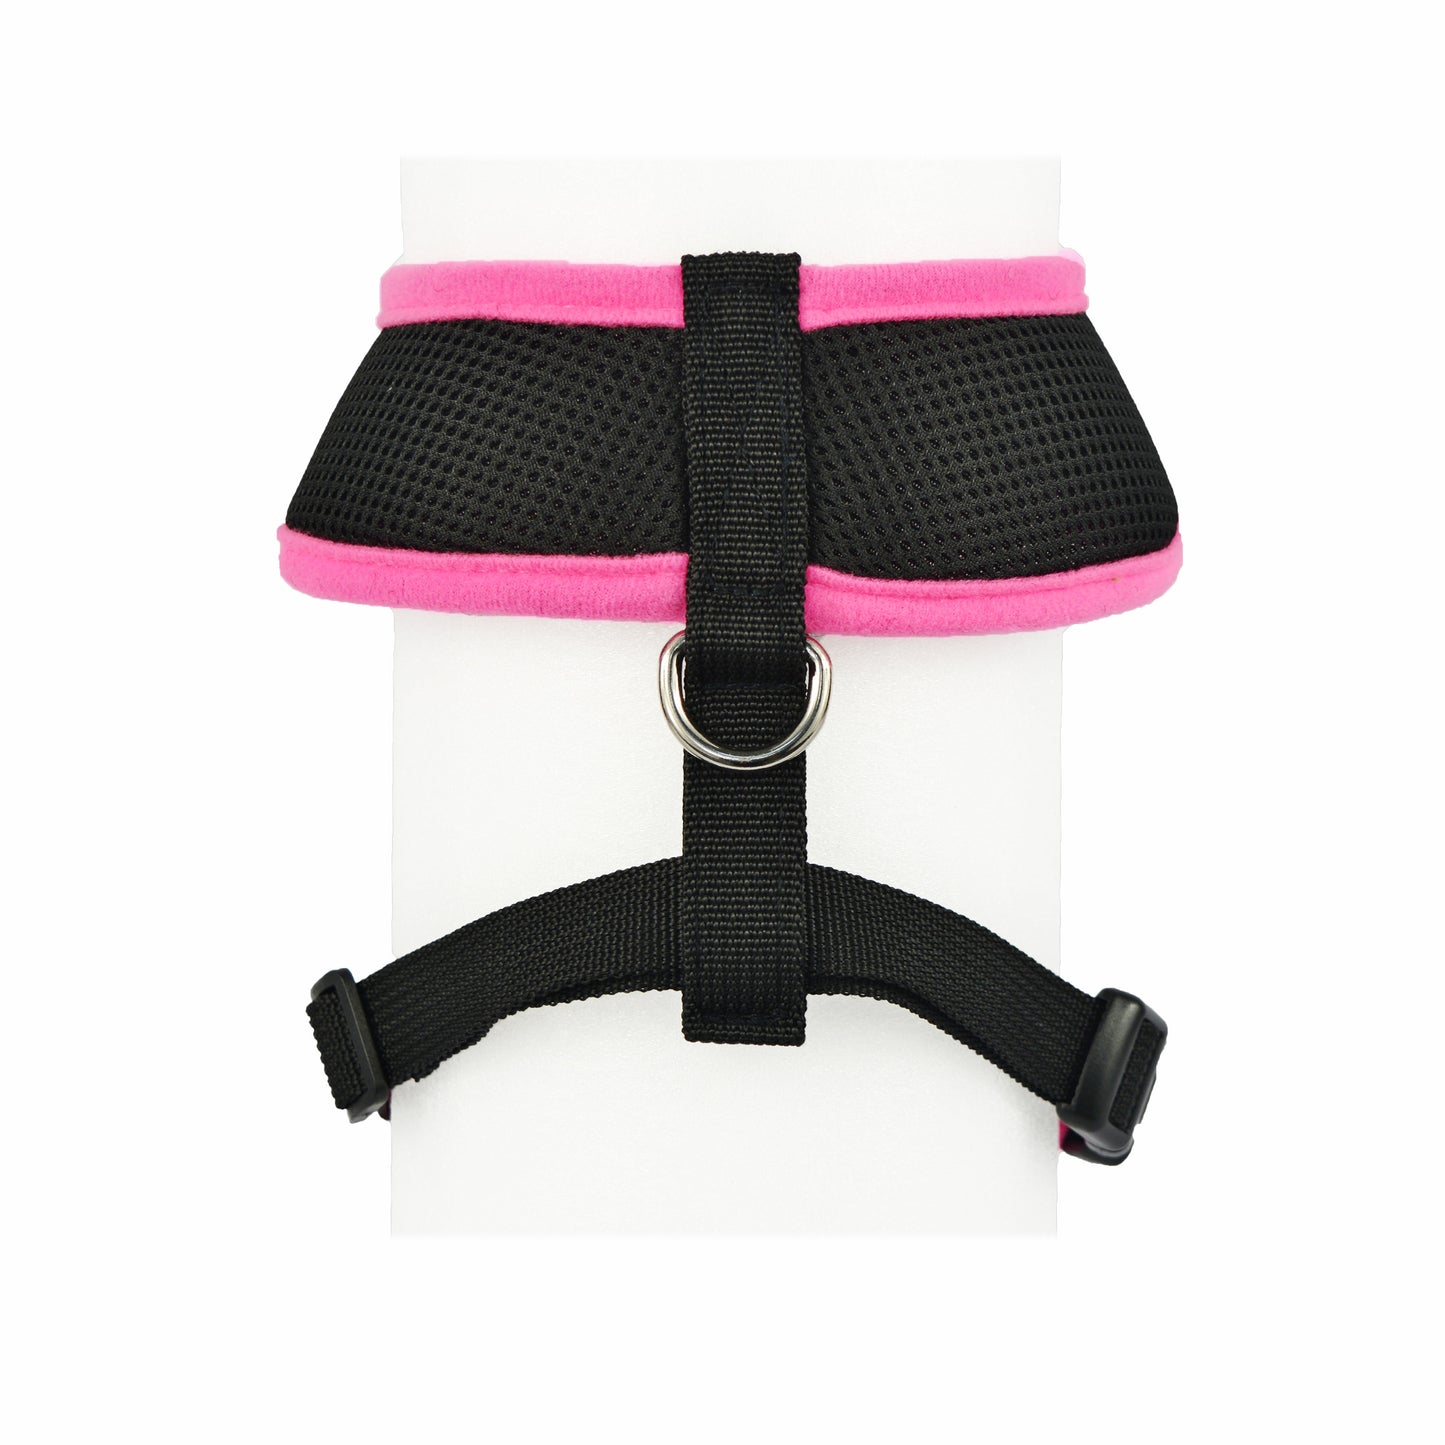 Mimetin Soft Pet Harness with Leash Adjustable Walking Pet Harness, Pink, M (16" to 24" Chest Size) 2 Piece Set